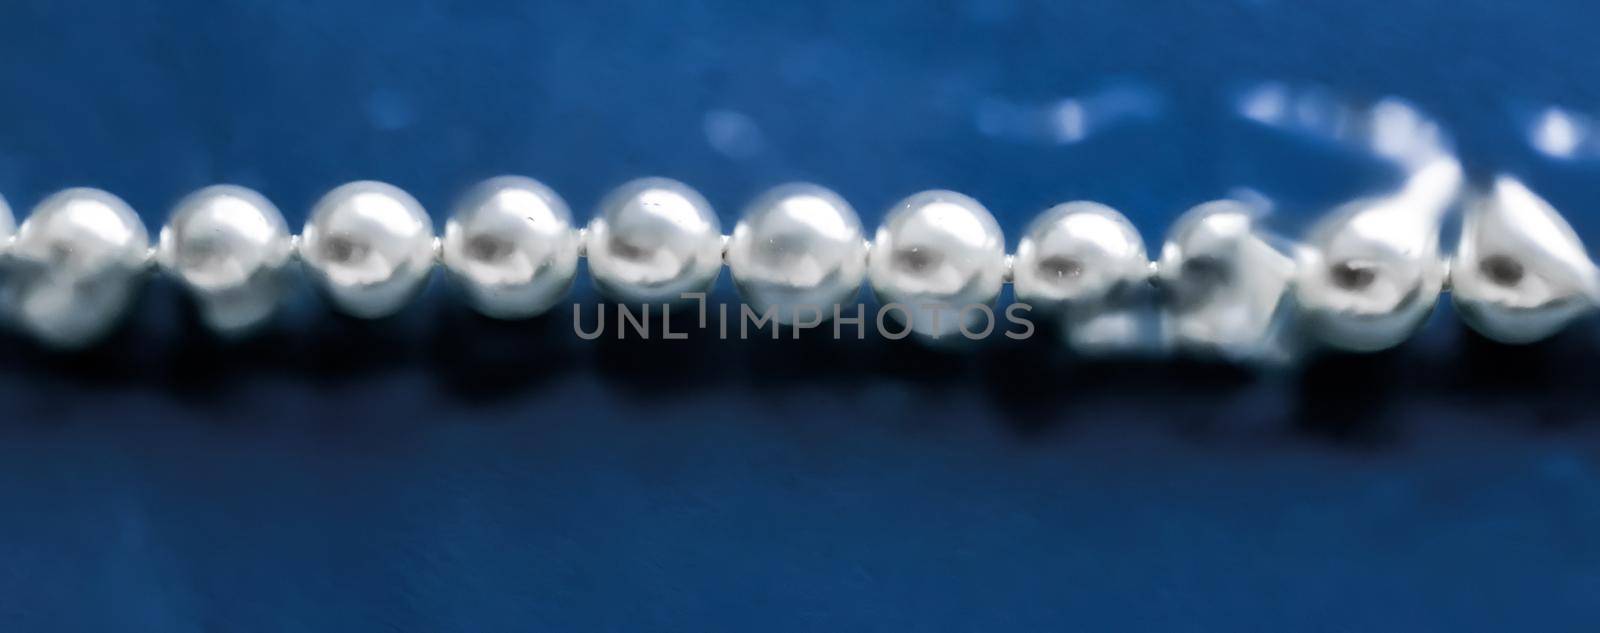 Jewelry, branding and gems concept - Coastal jewellery fashion, pearl necklace under blue water background, glamour style present and chic gift for luxury jewelery brand, holiday banner design